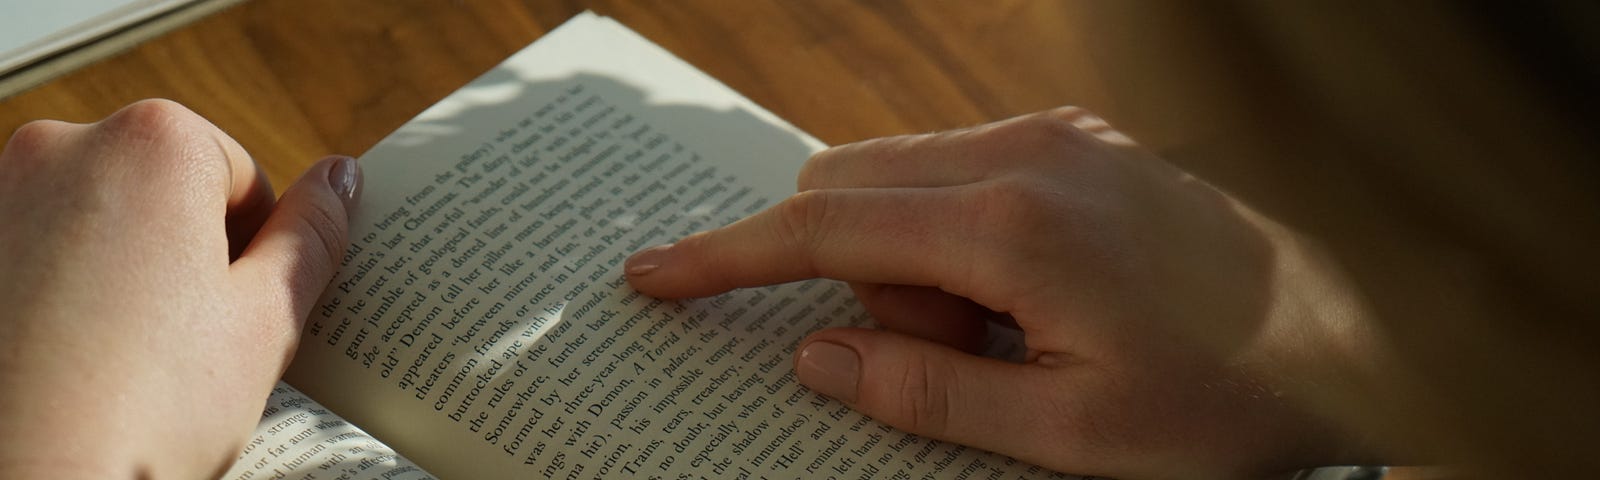 image over the shoulder, seeing a person with two hands on the book and reading